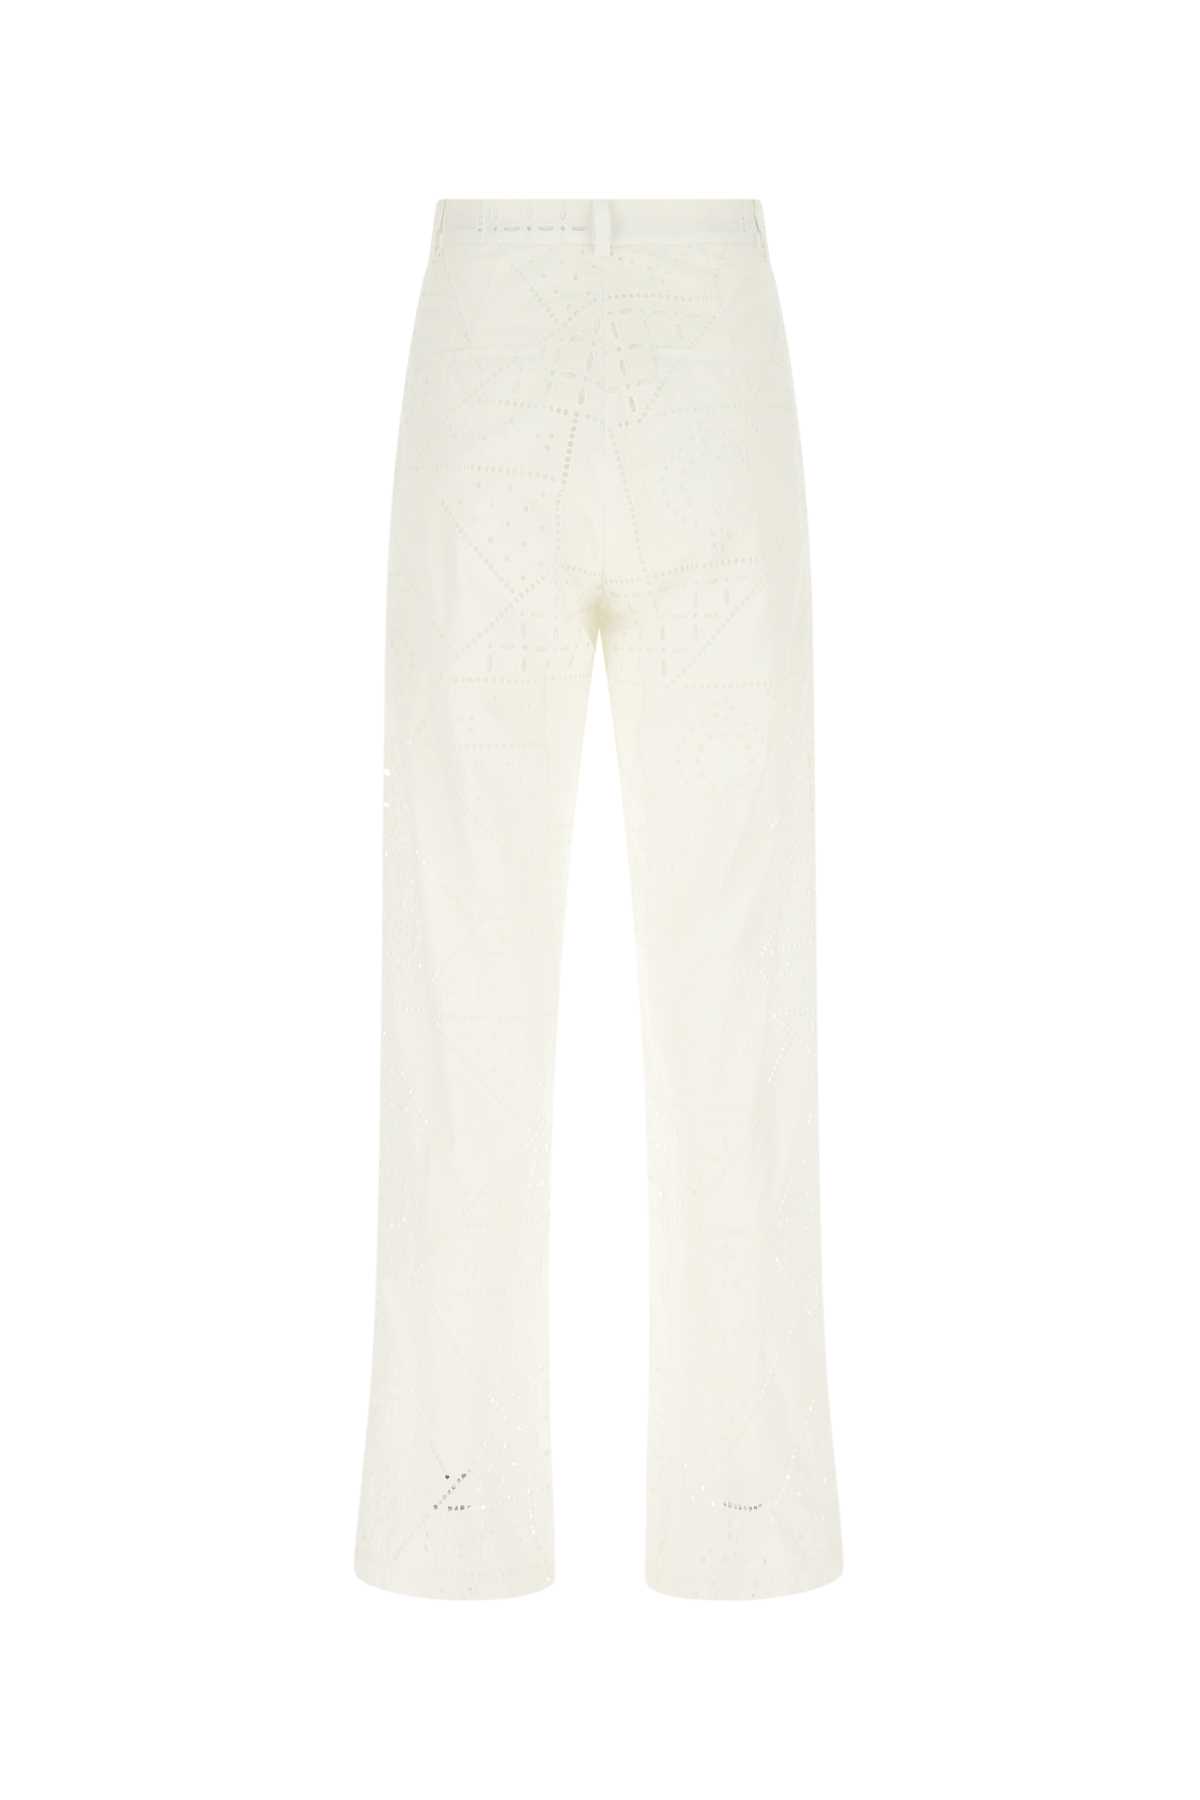 Msgm White Cotton Blend Pant In 02